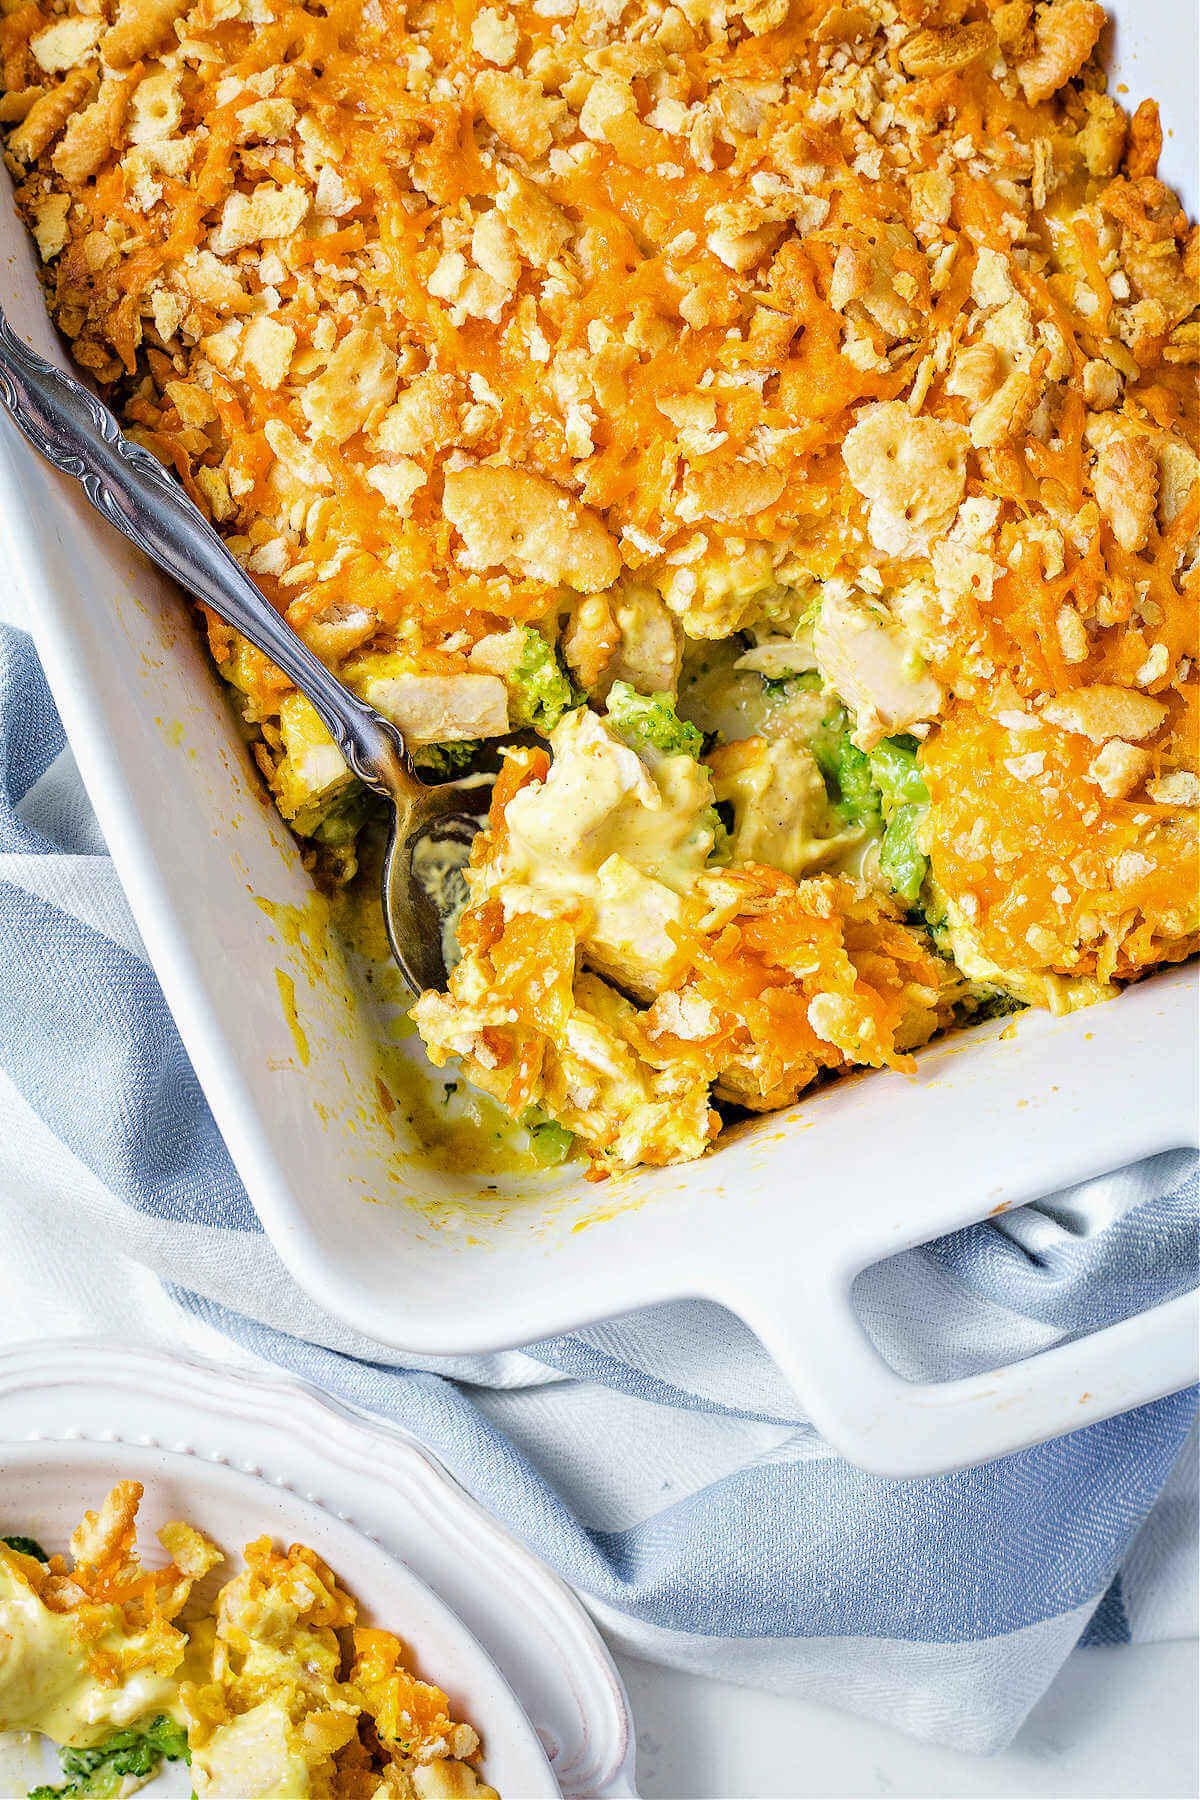 a serving spoon inserted into a baked chicken broccoli casserole and a serving plate to the side.